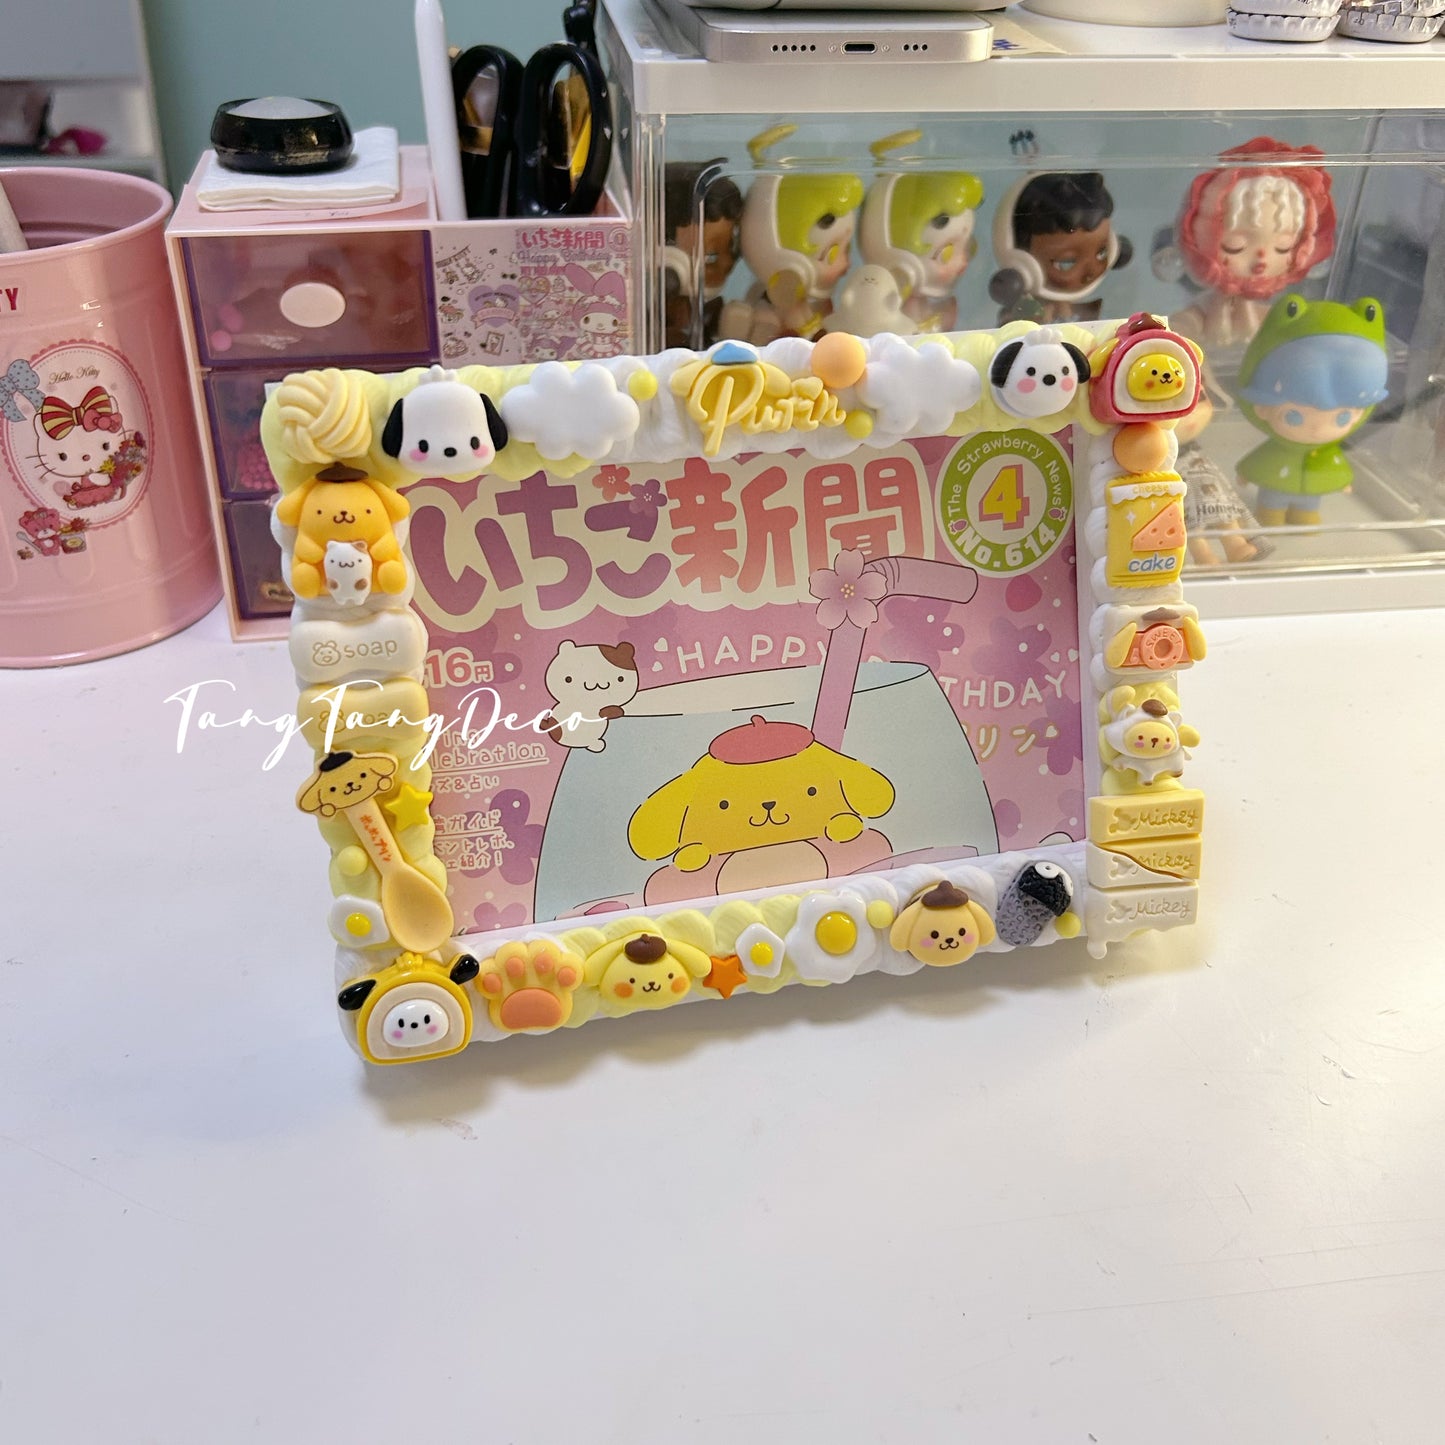 Pompom Purin and Pochacco picture frame